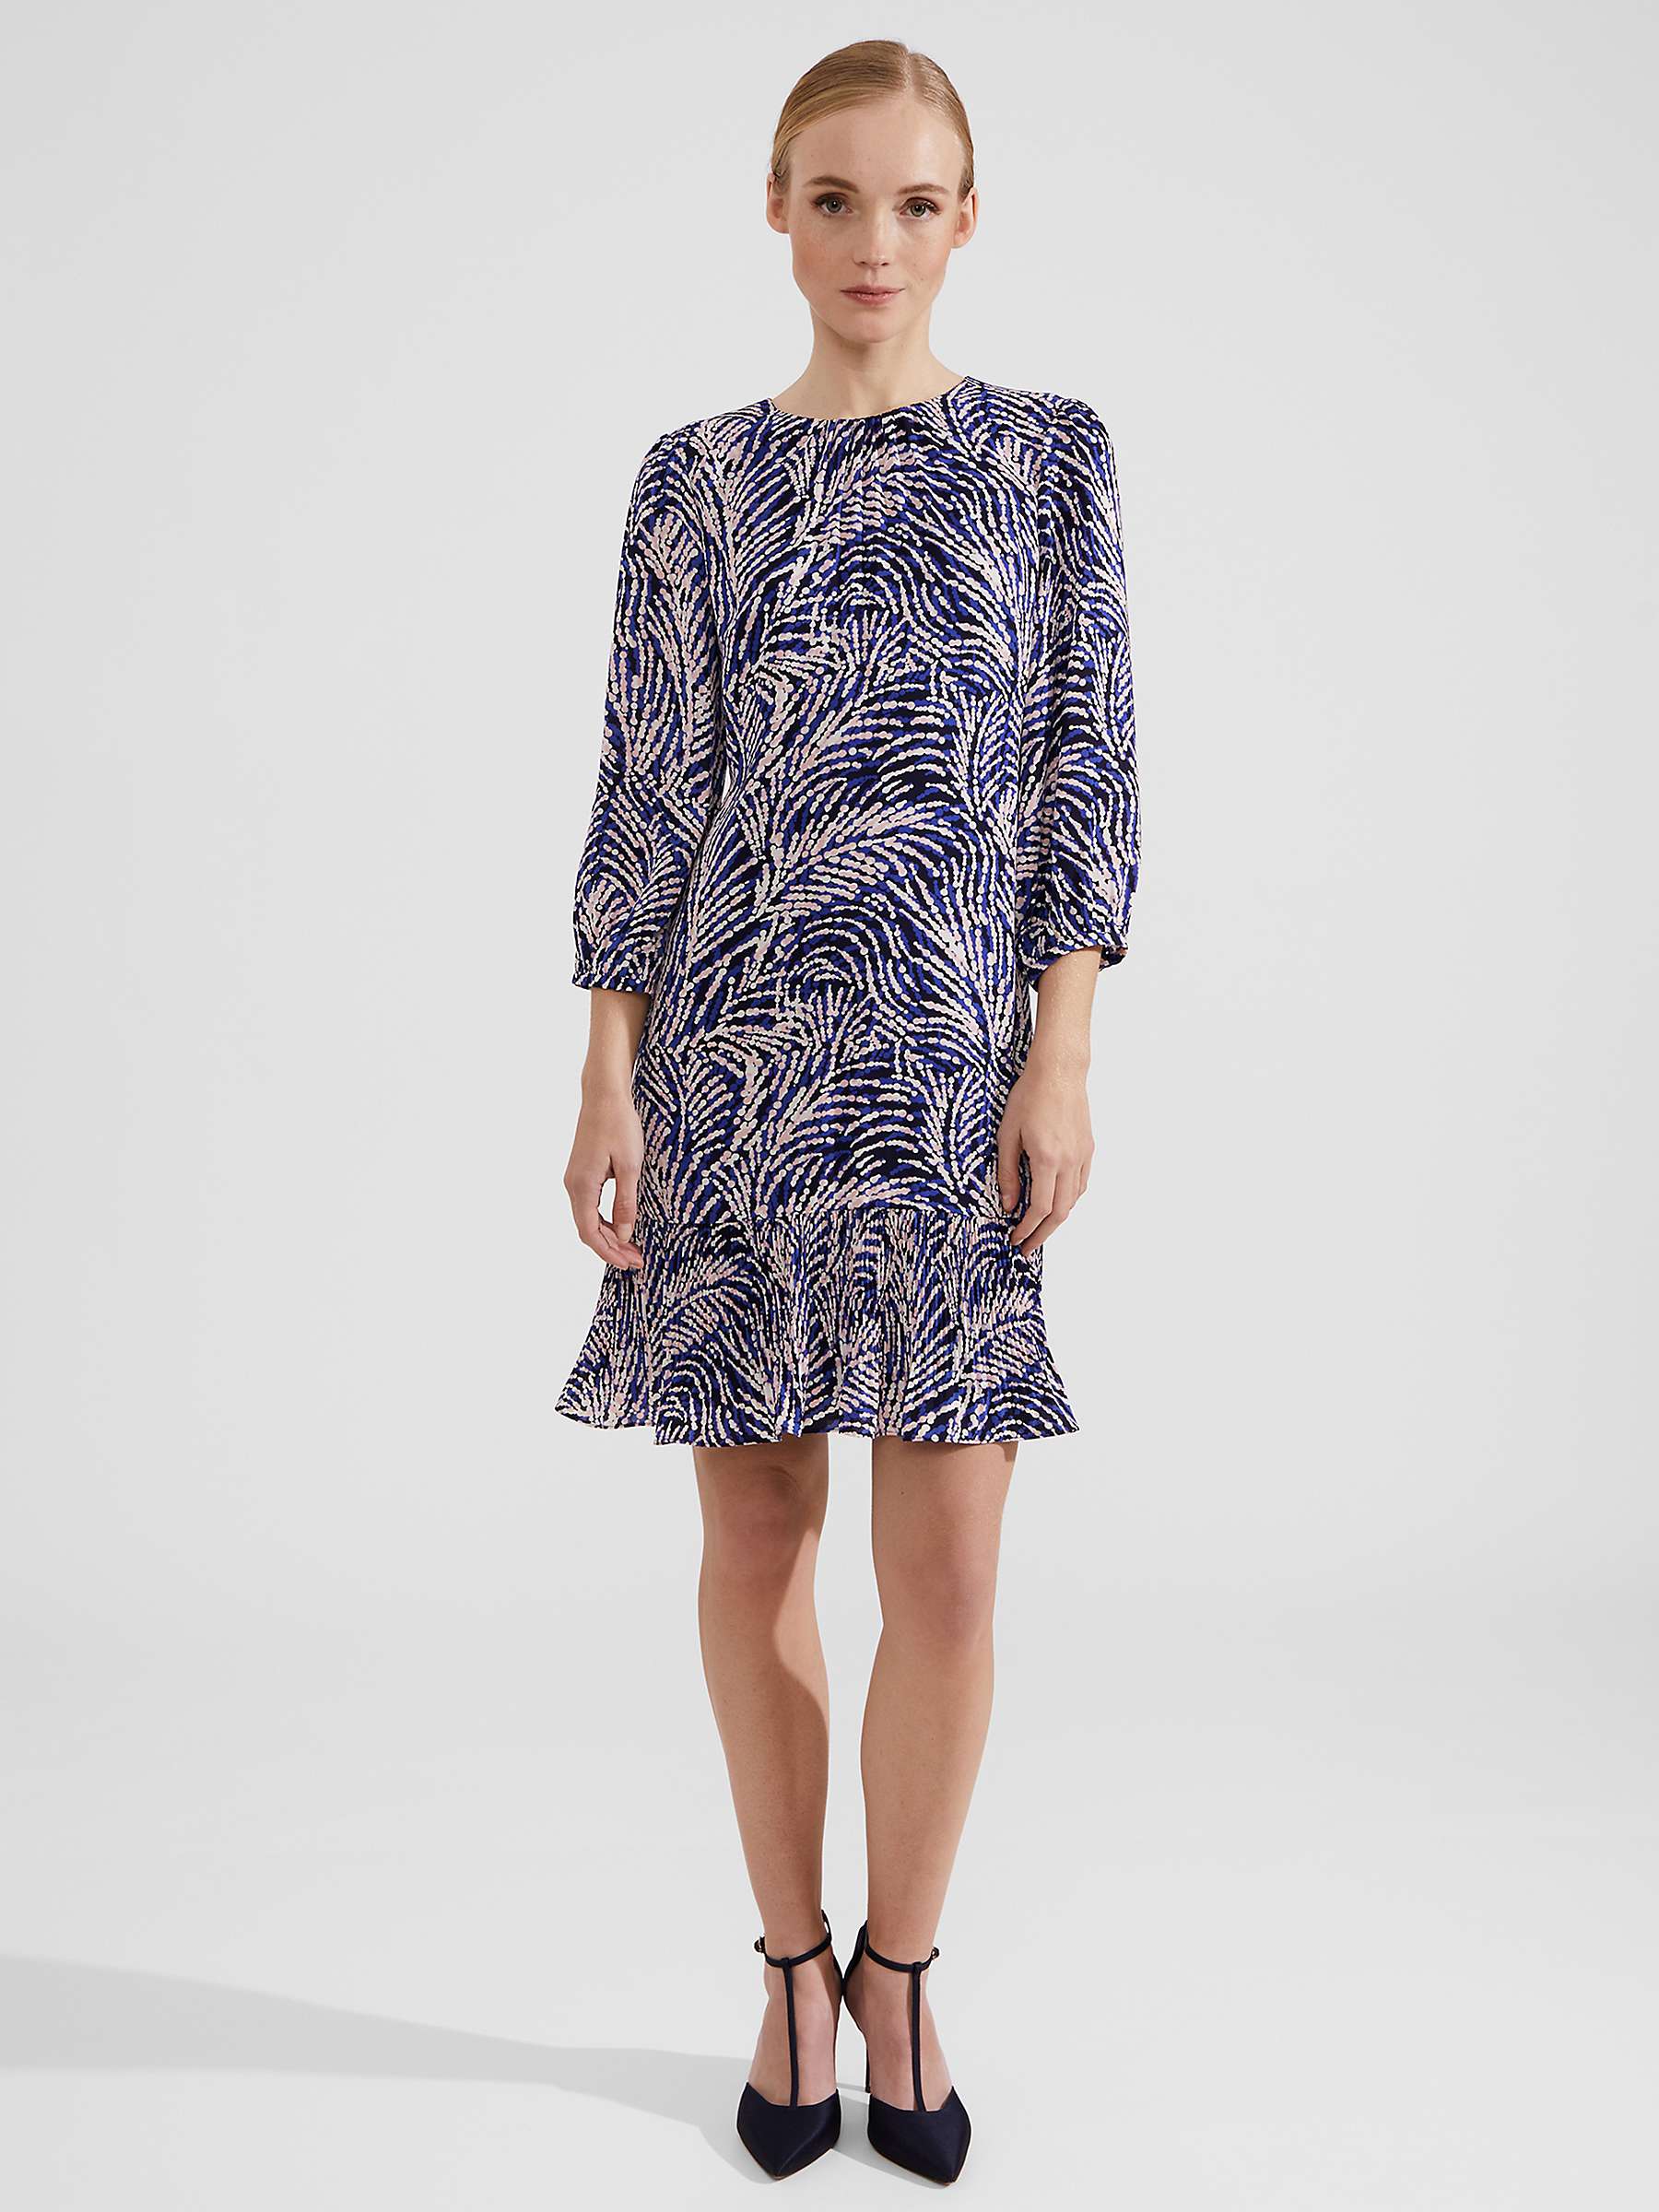 Buy Hobbs Petite Lilith Abstract Print Dress, Navy/Multi Online at johnlewis.com